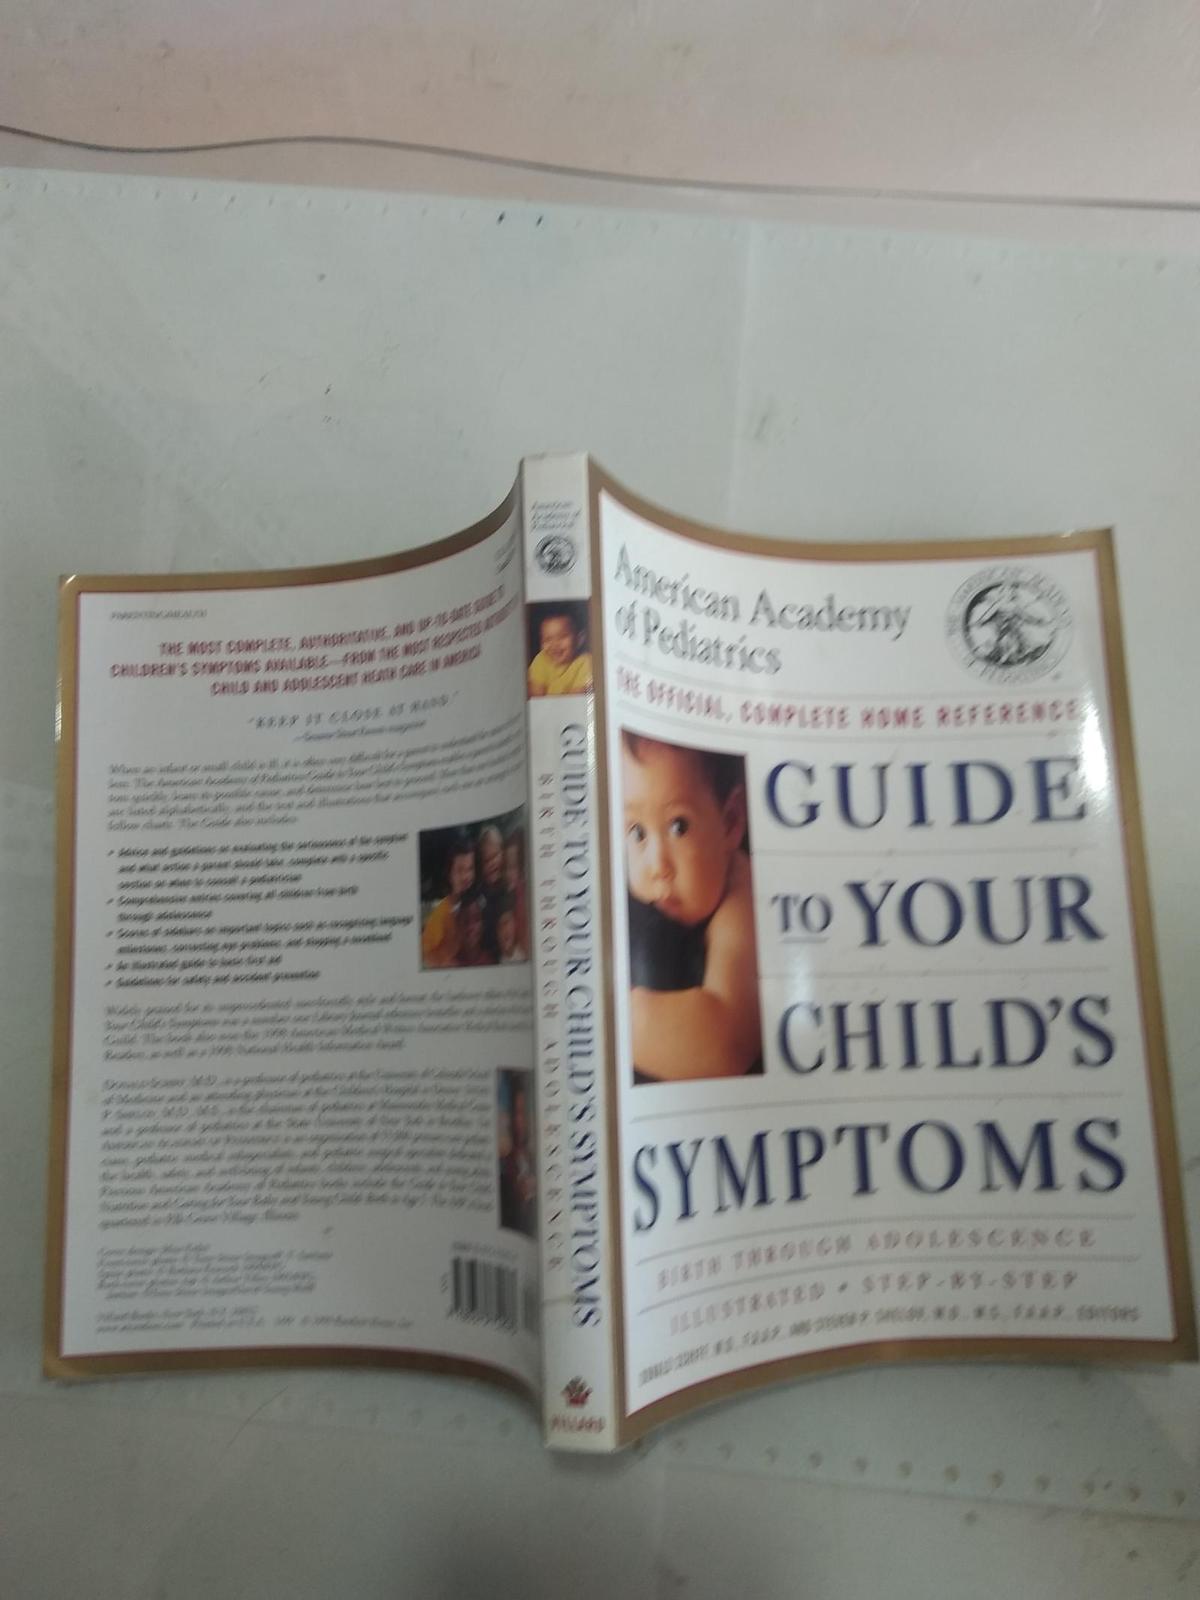 （American Academy of Pediatrics） Guide to your Childs Symptoms 《孩子症状家庭诊断指南》